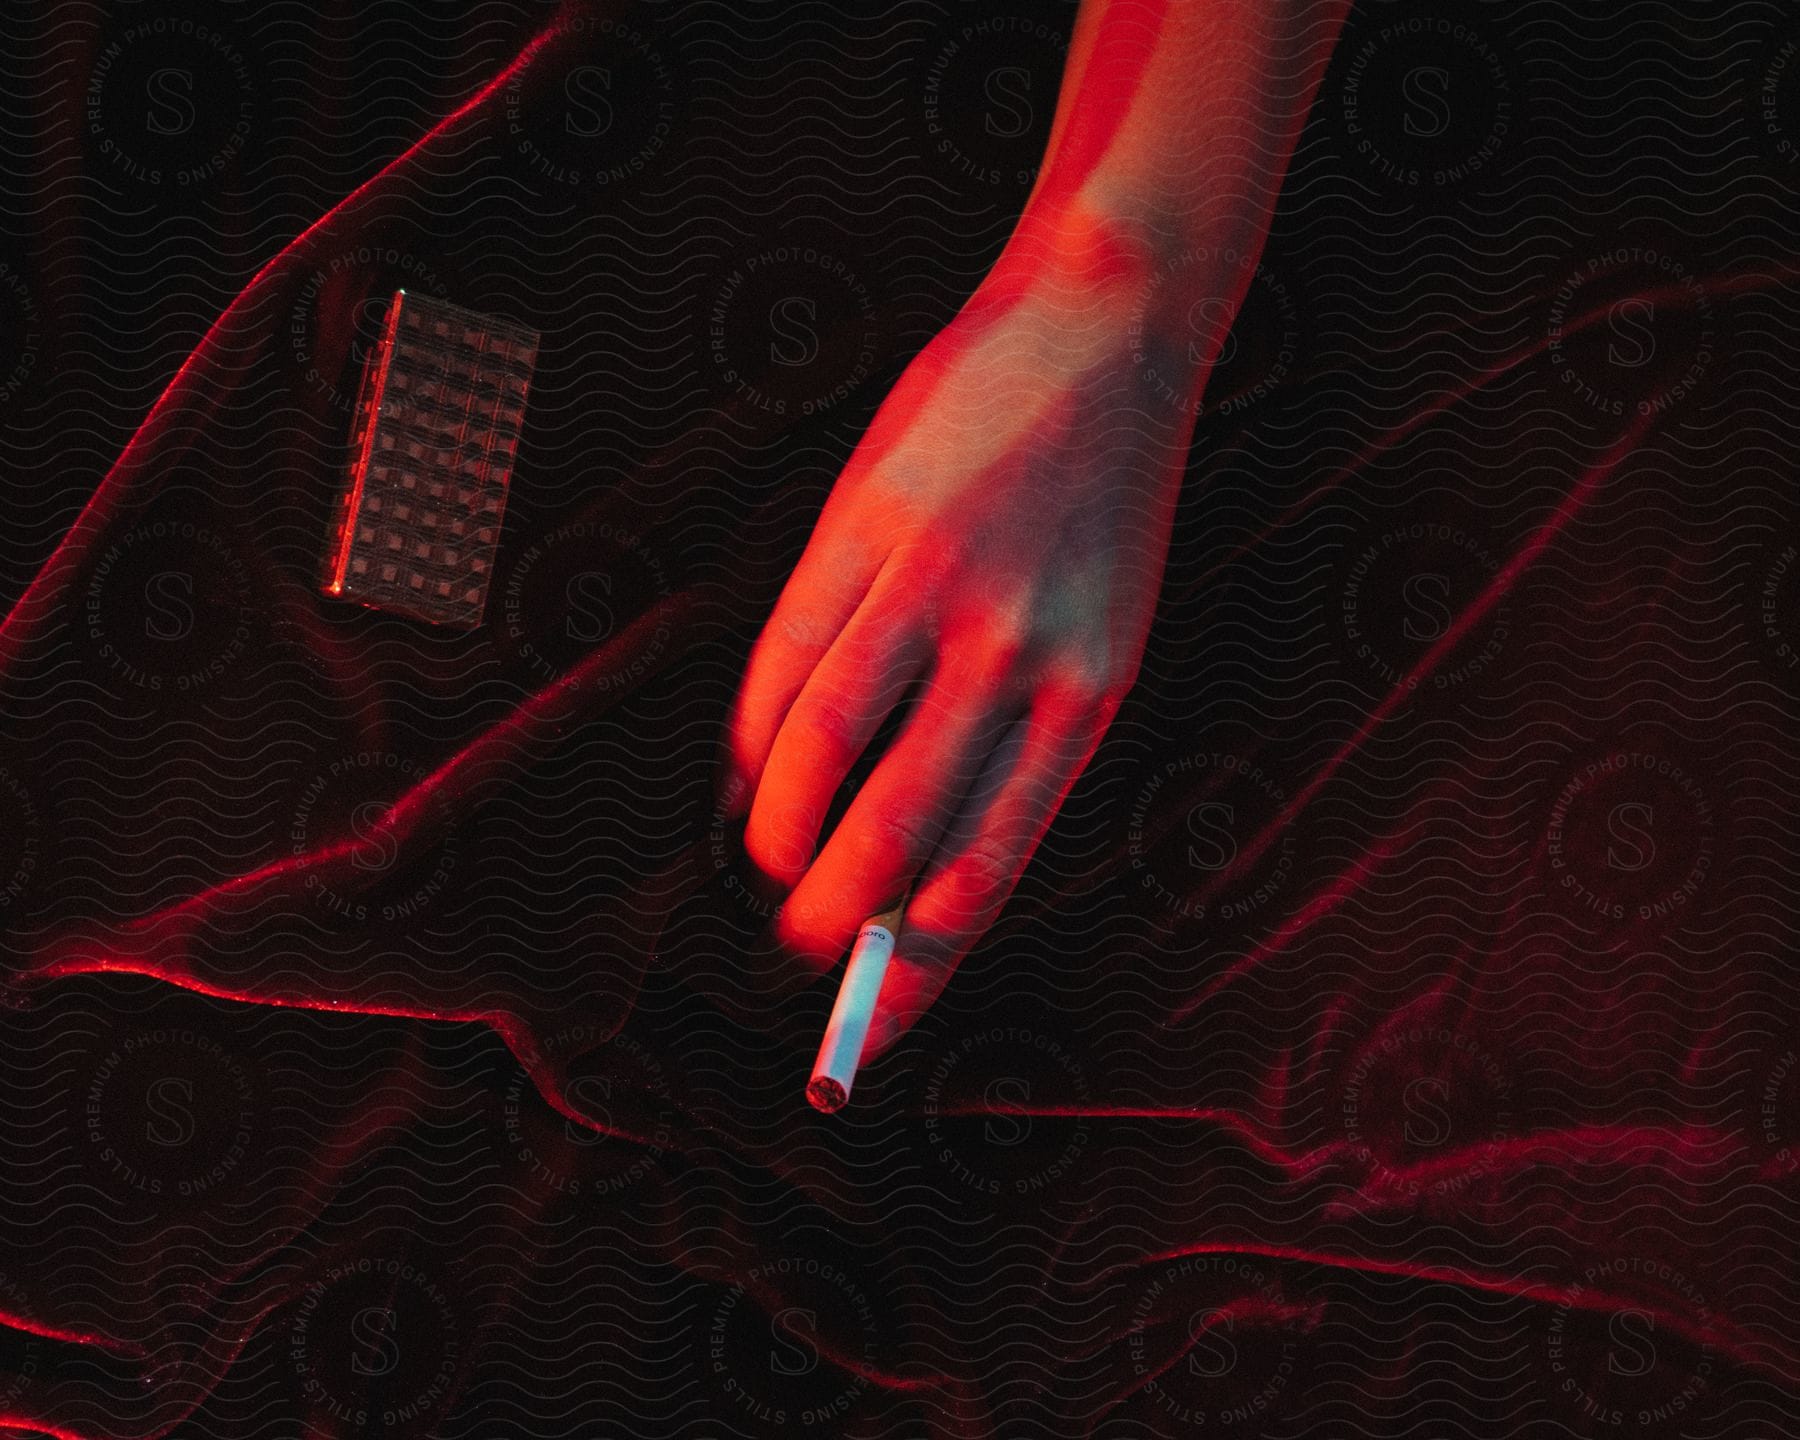 A persons arm glows crimson in the reflection of a lamplight holding a cigarette in a bed of deep red velvet